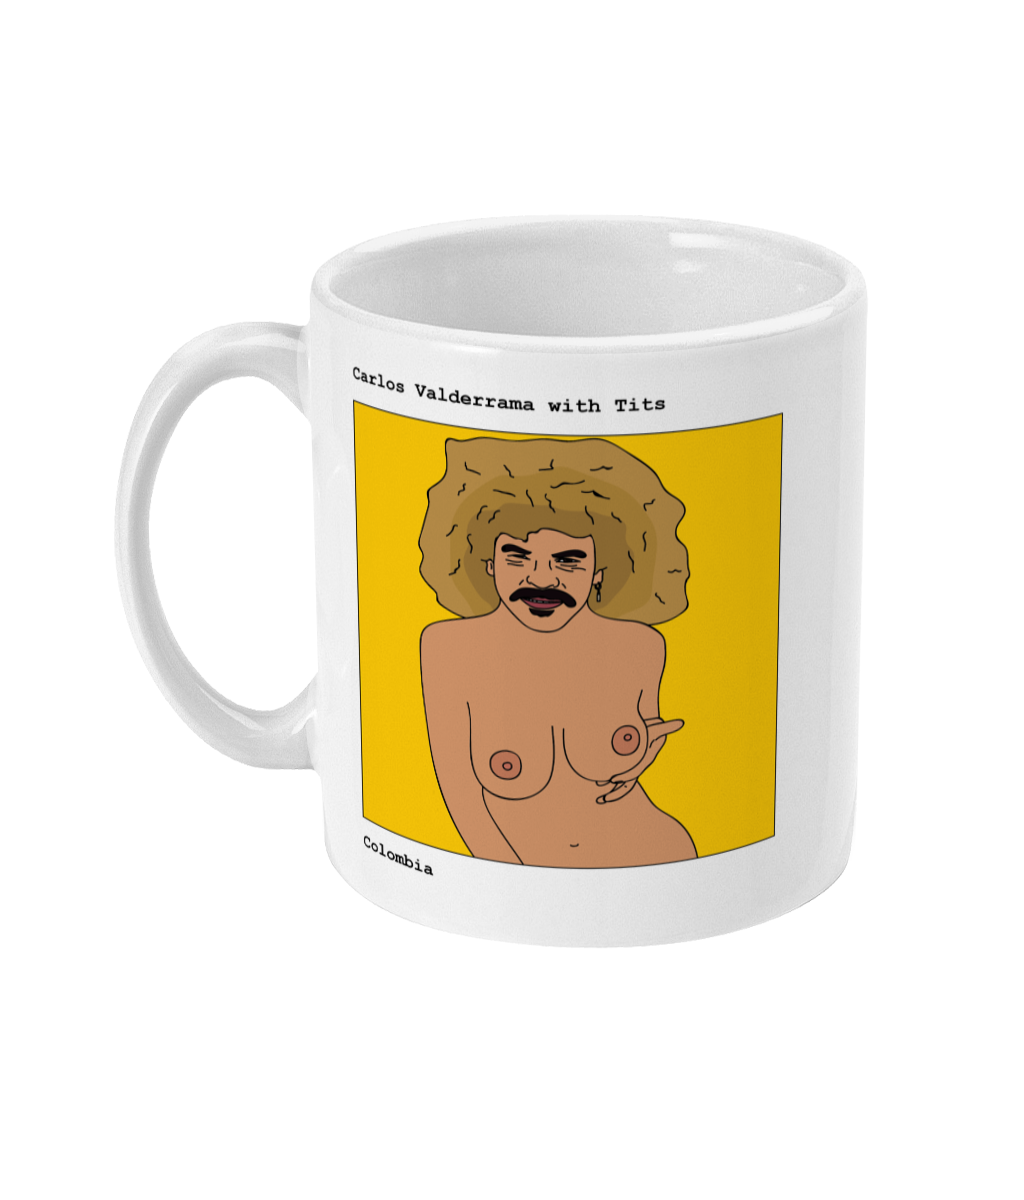 Carlos Valderrama with Tits - Footballers with Tits